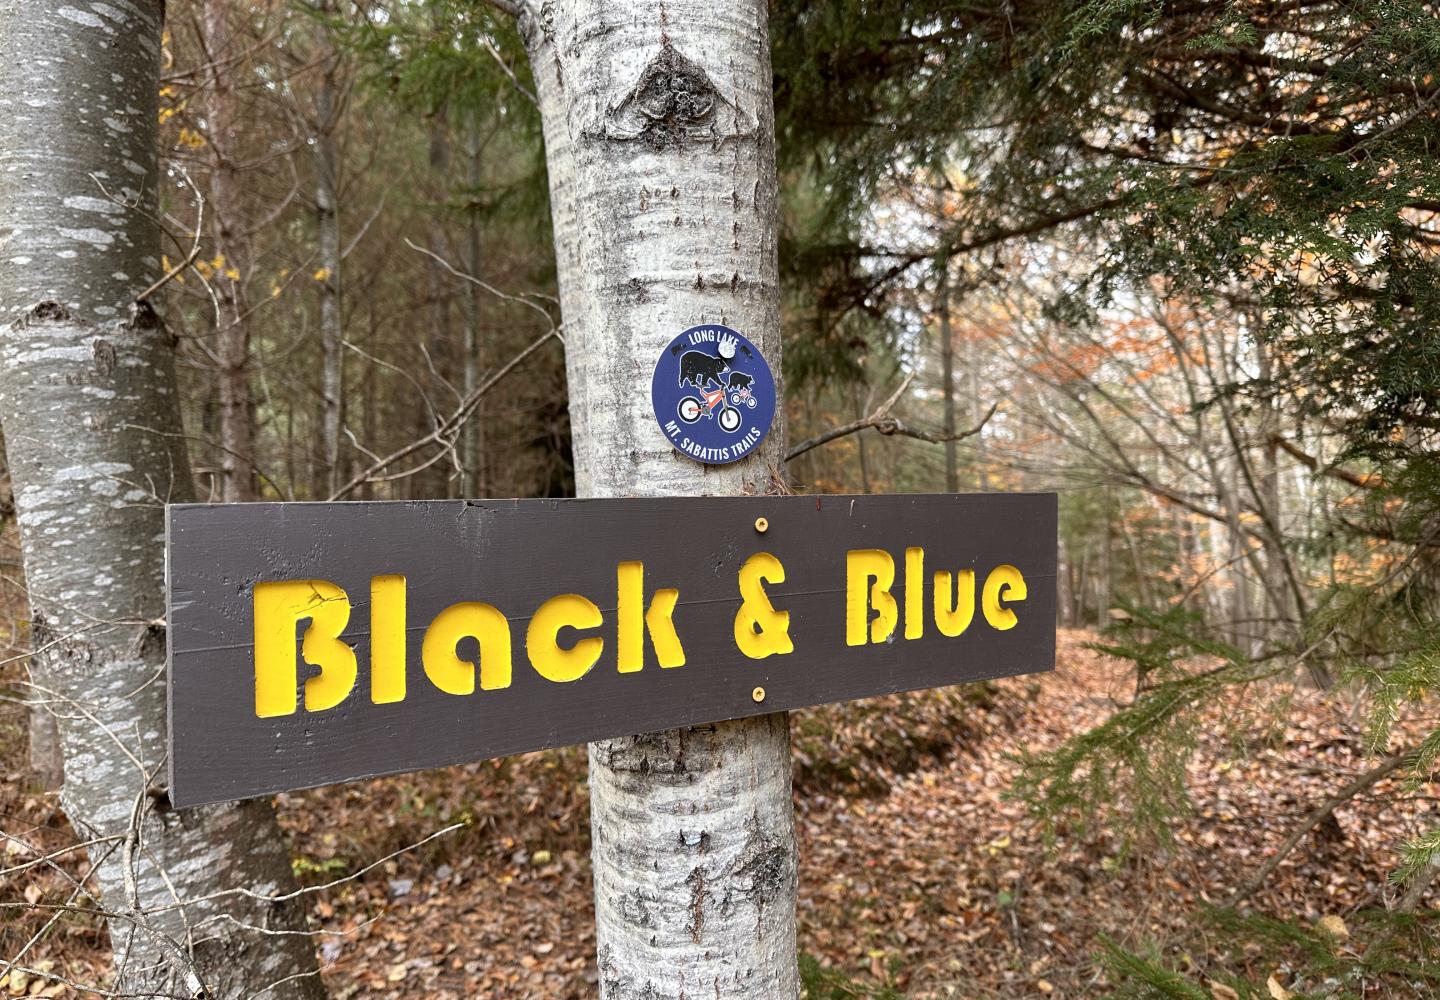 Black and Blue, named after an album by the Rolling Stones, is an intermediate trail used to access Paint It Black, an expert trail. 